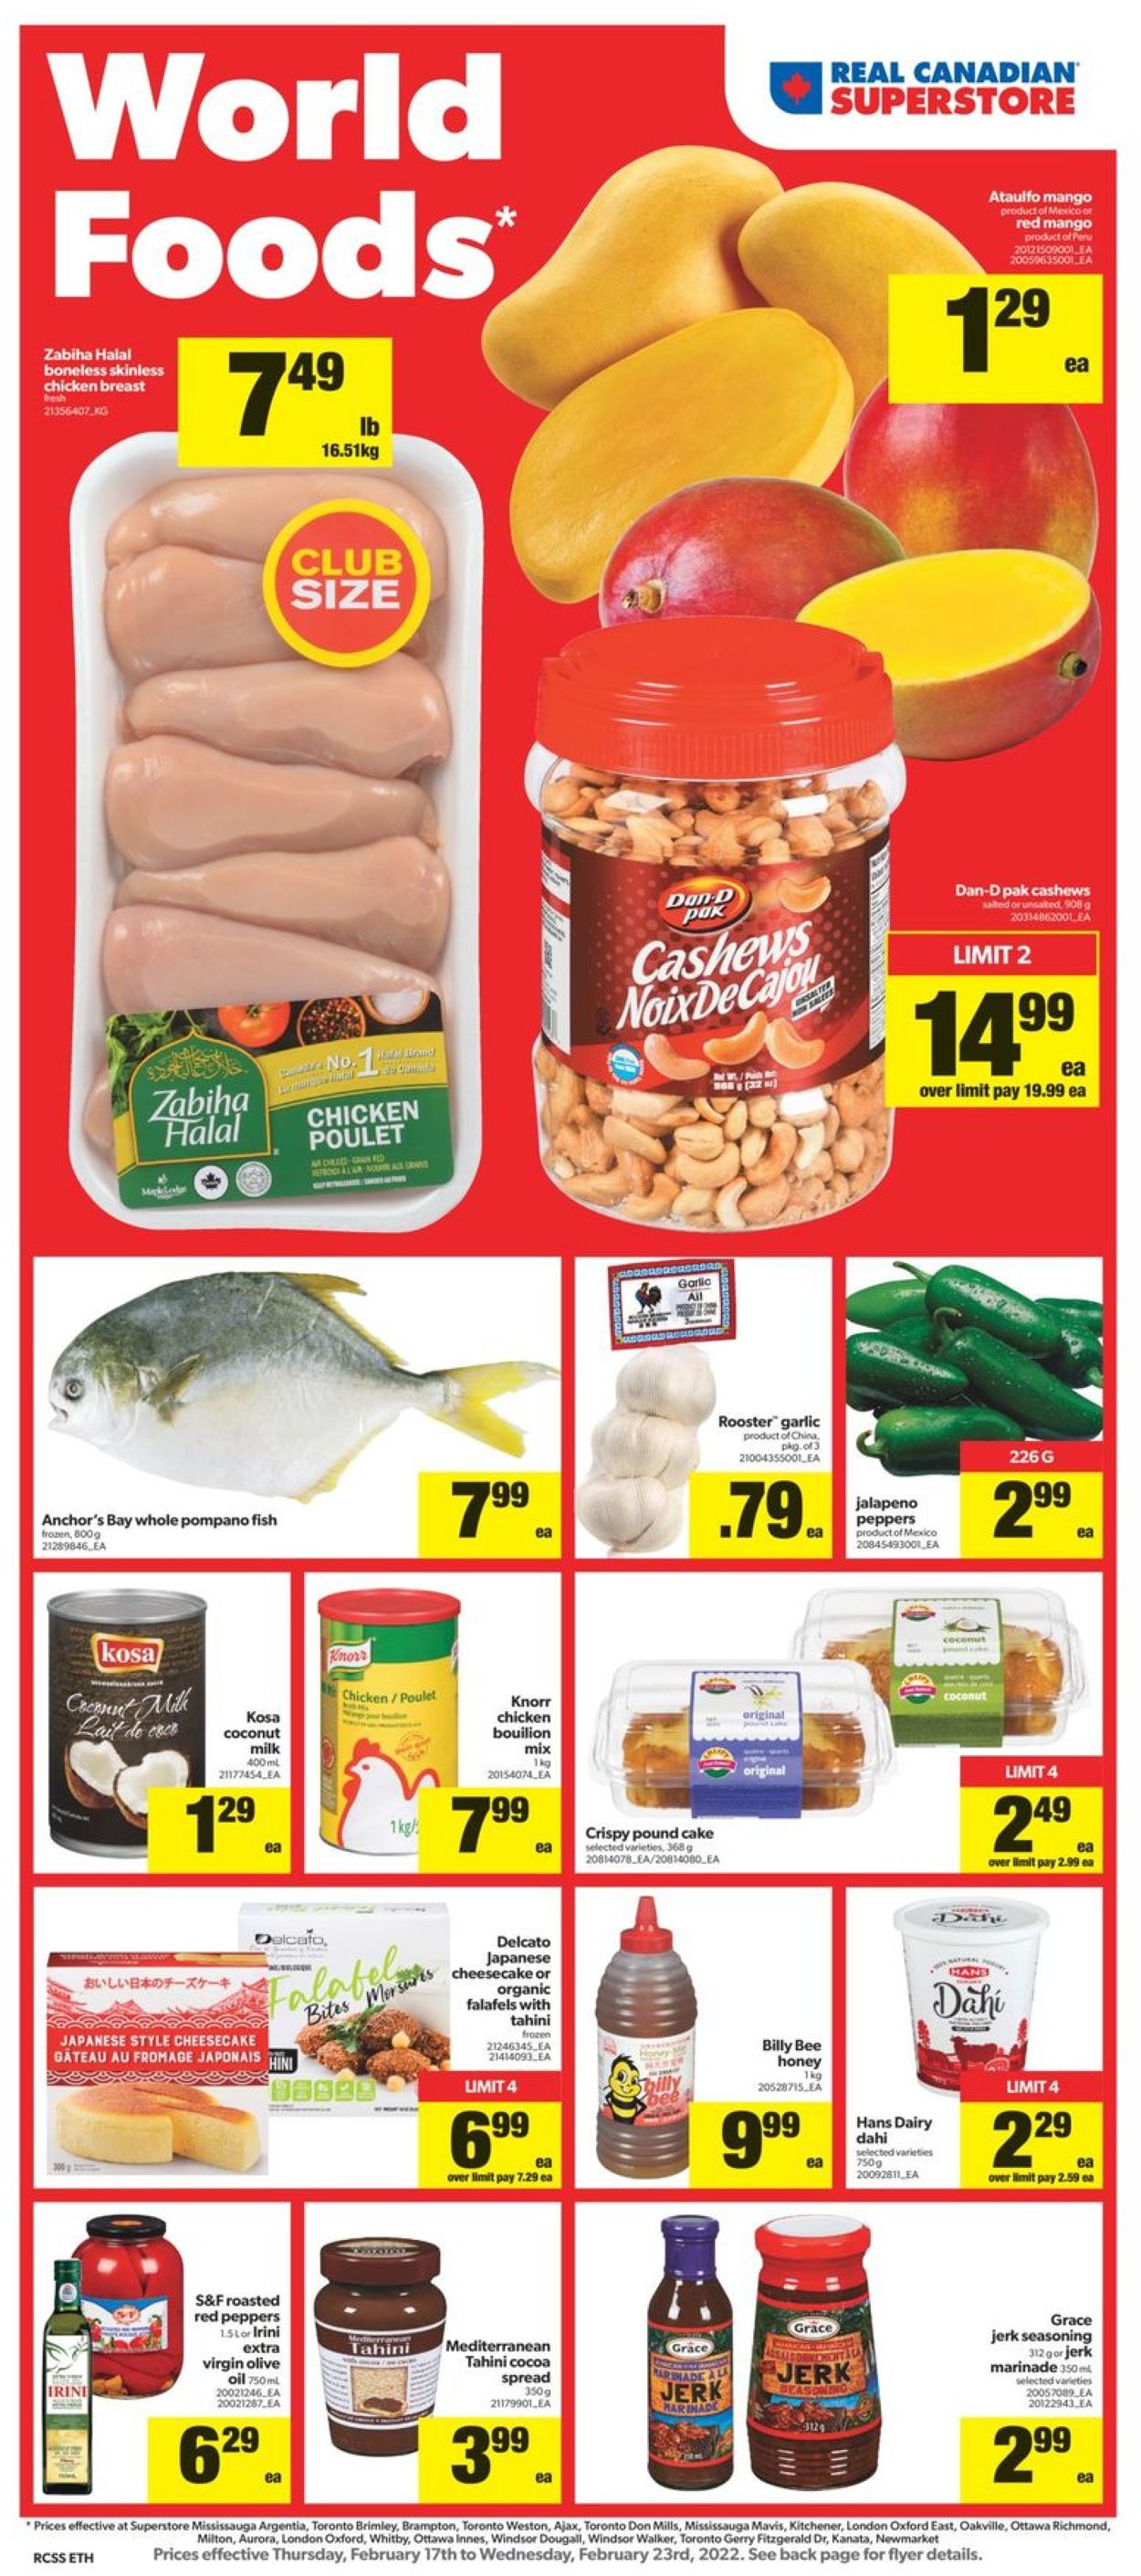 Real Canadian Superstore Flyer - 02/17-02/23/2022